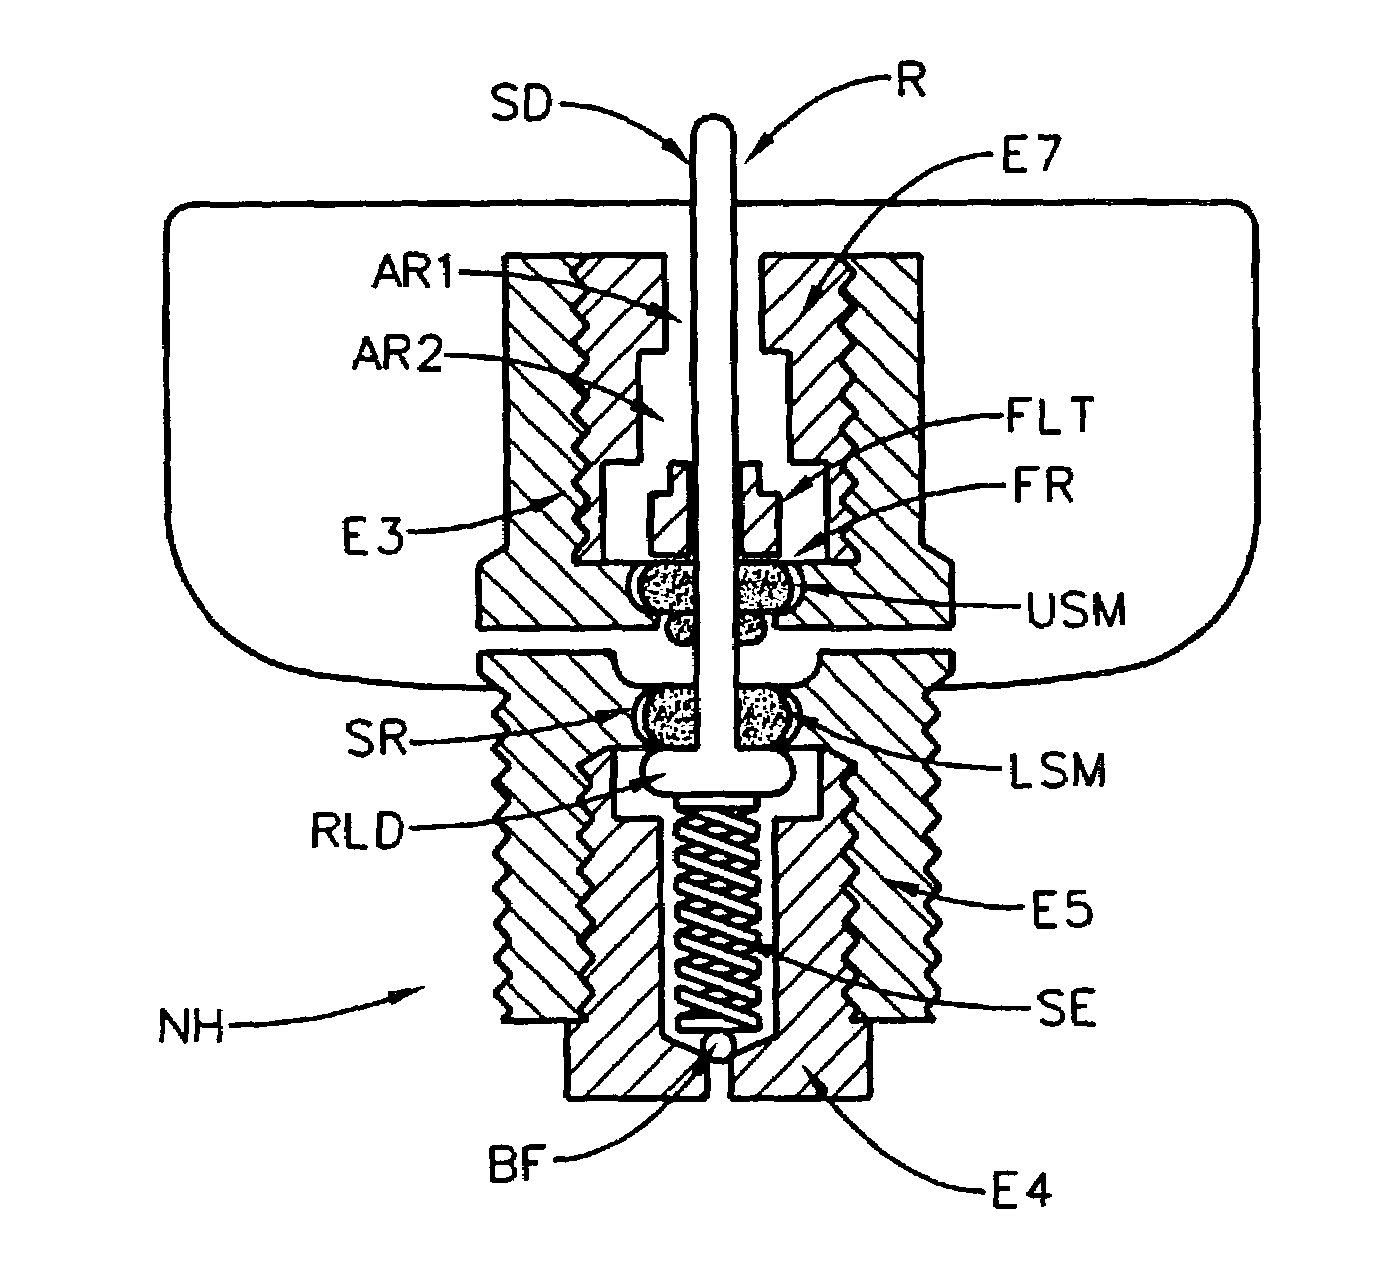 Laterally ejecting fluid flow control system and method